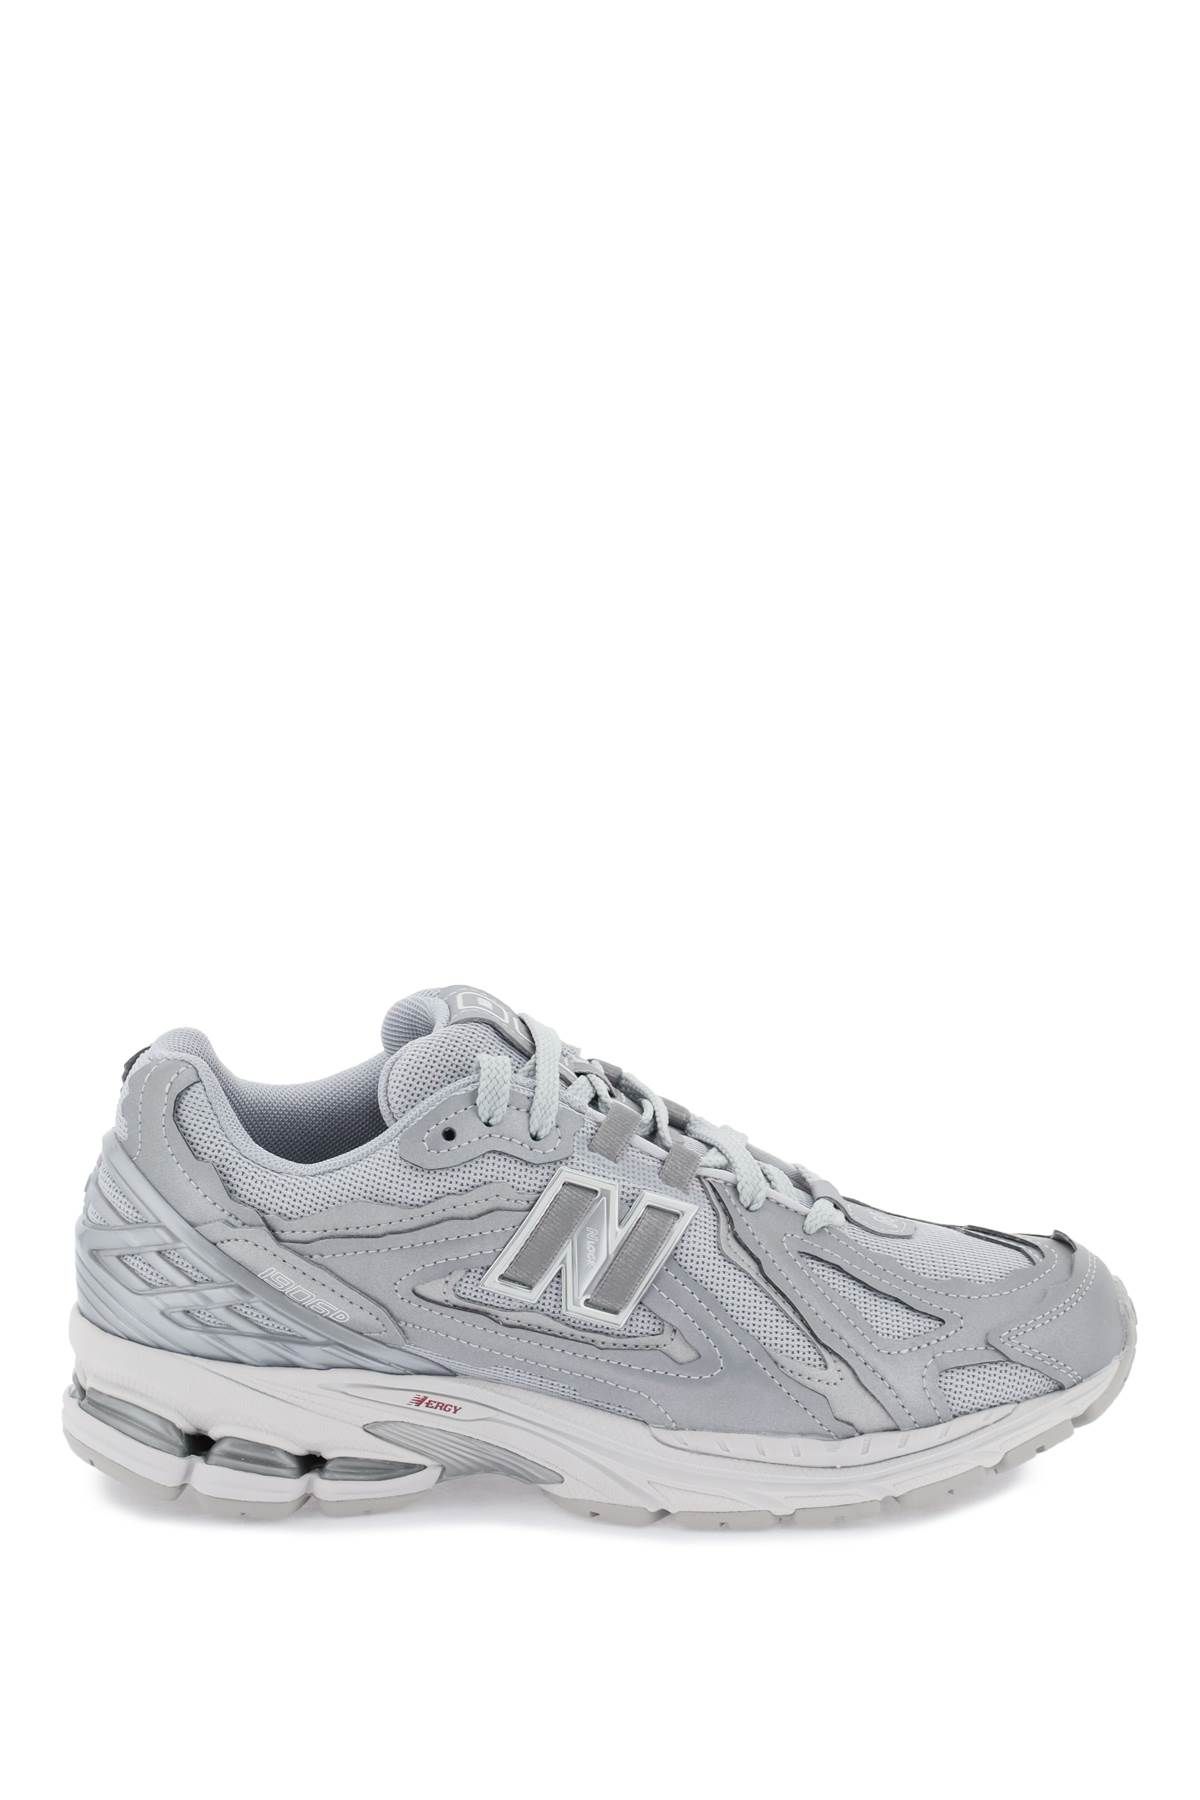 New Balance NEW BALANCE 1906dh sneakers